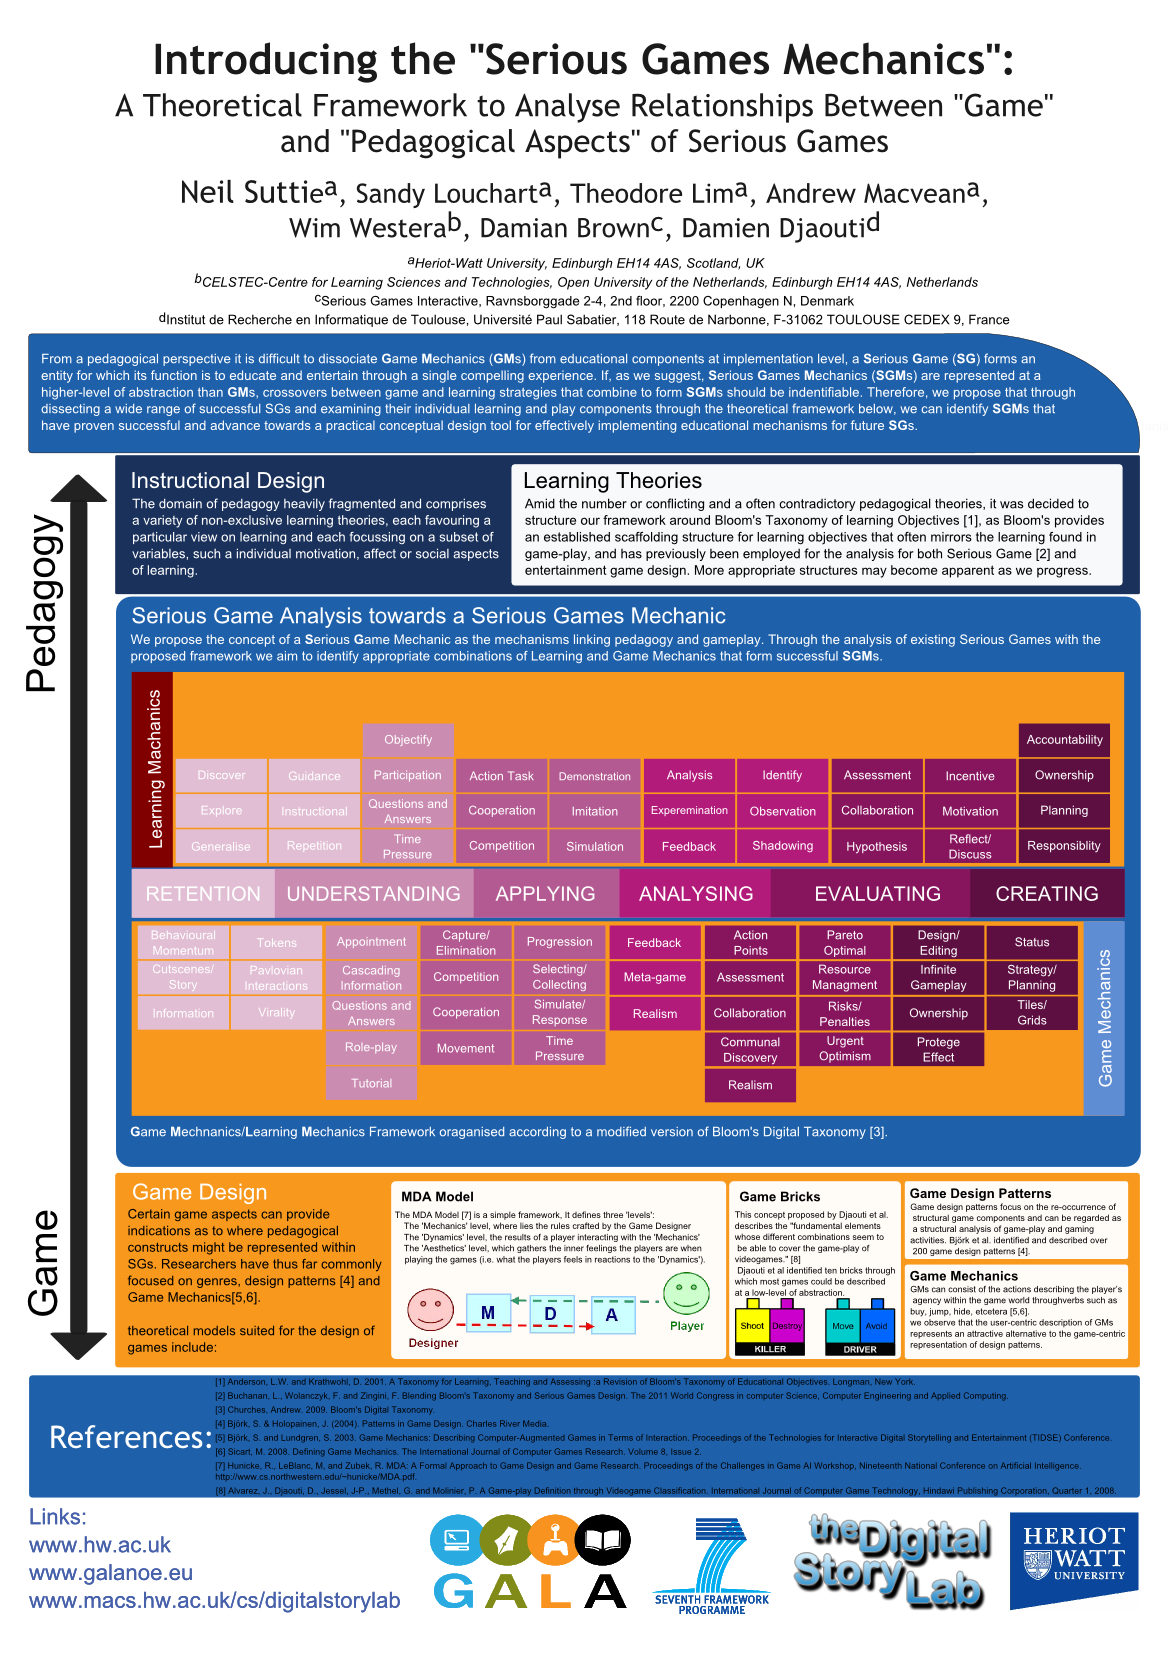 Poster presented. Pedagogical software Tools. Book of pedagogical skills in Sports. Satisfaction & attitude Analysis Grid.